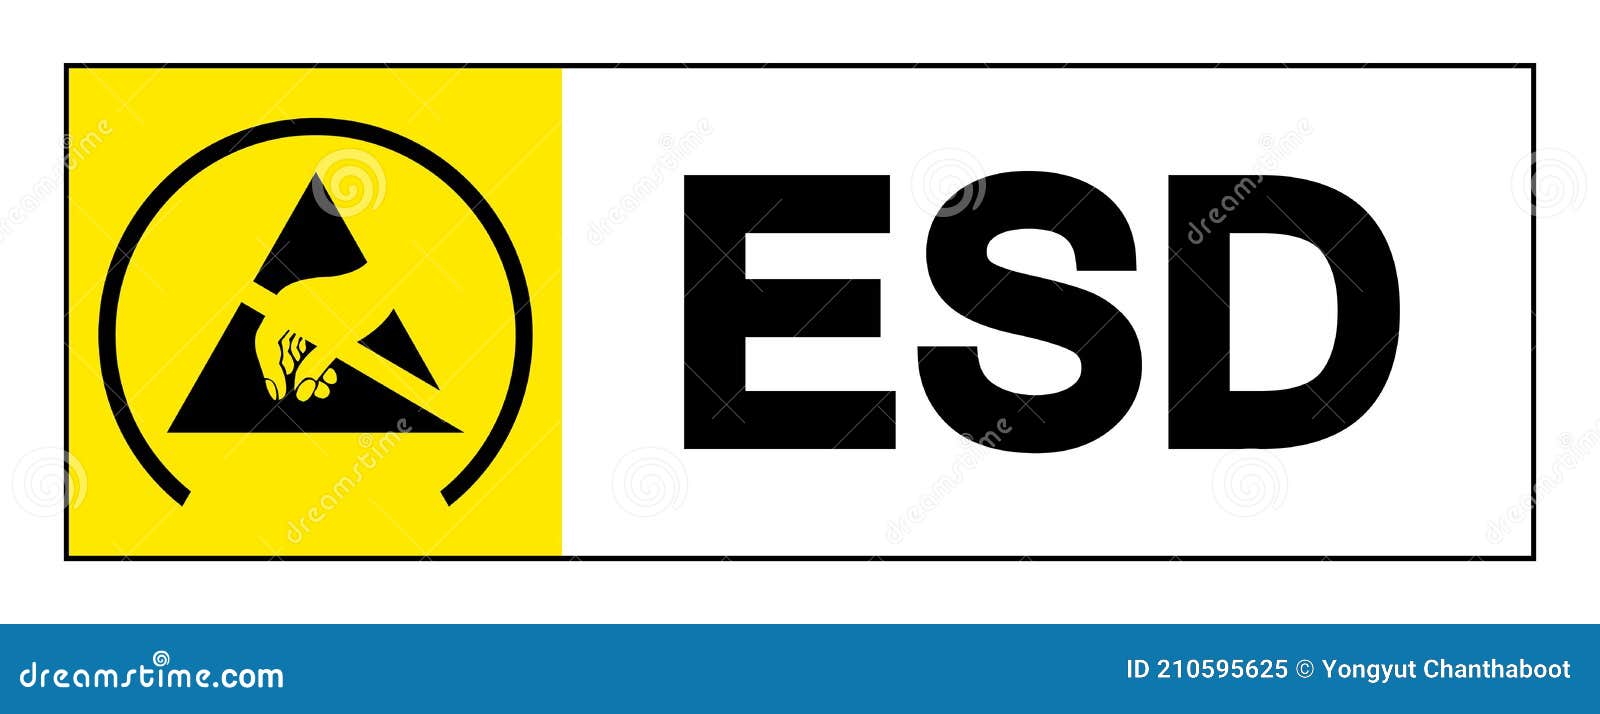 esd protective area  sign,  ,  on white background label .eps10